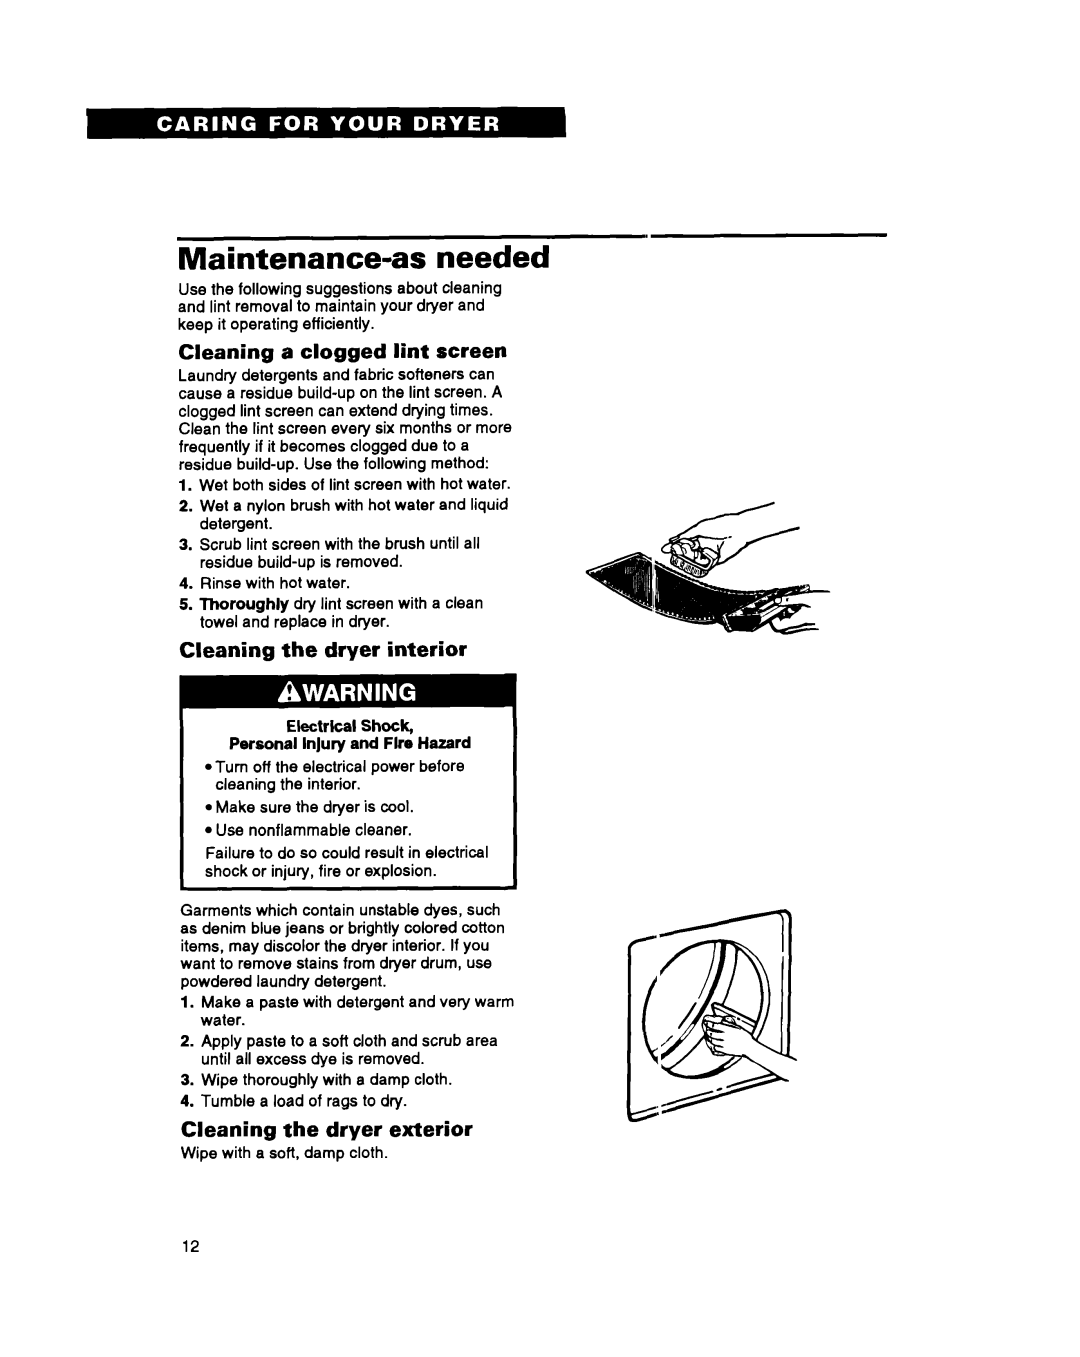 Whirlpool 3396311 manual Maintenance-as needed, Cleaning a clogged lint screen, Cleaning the dryer interior 